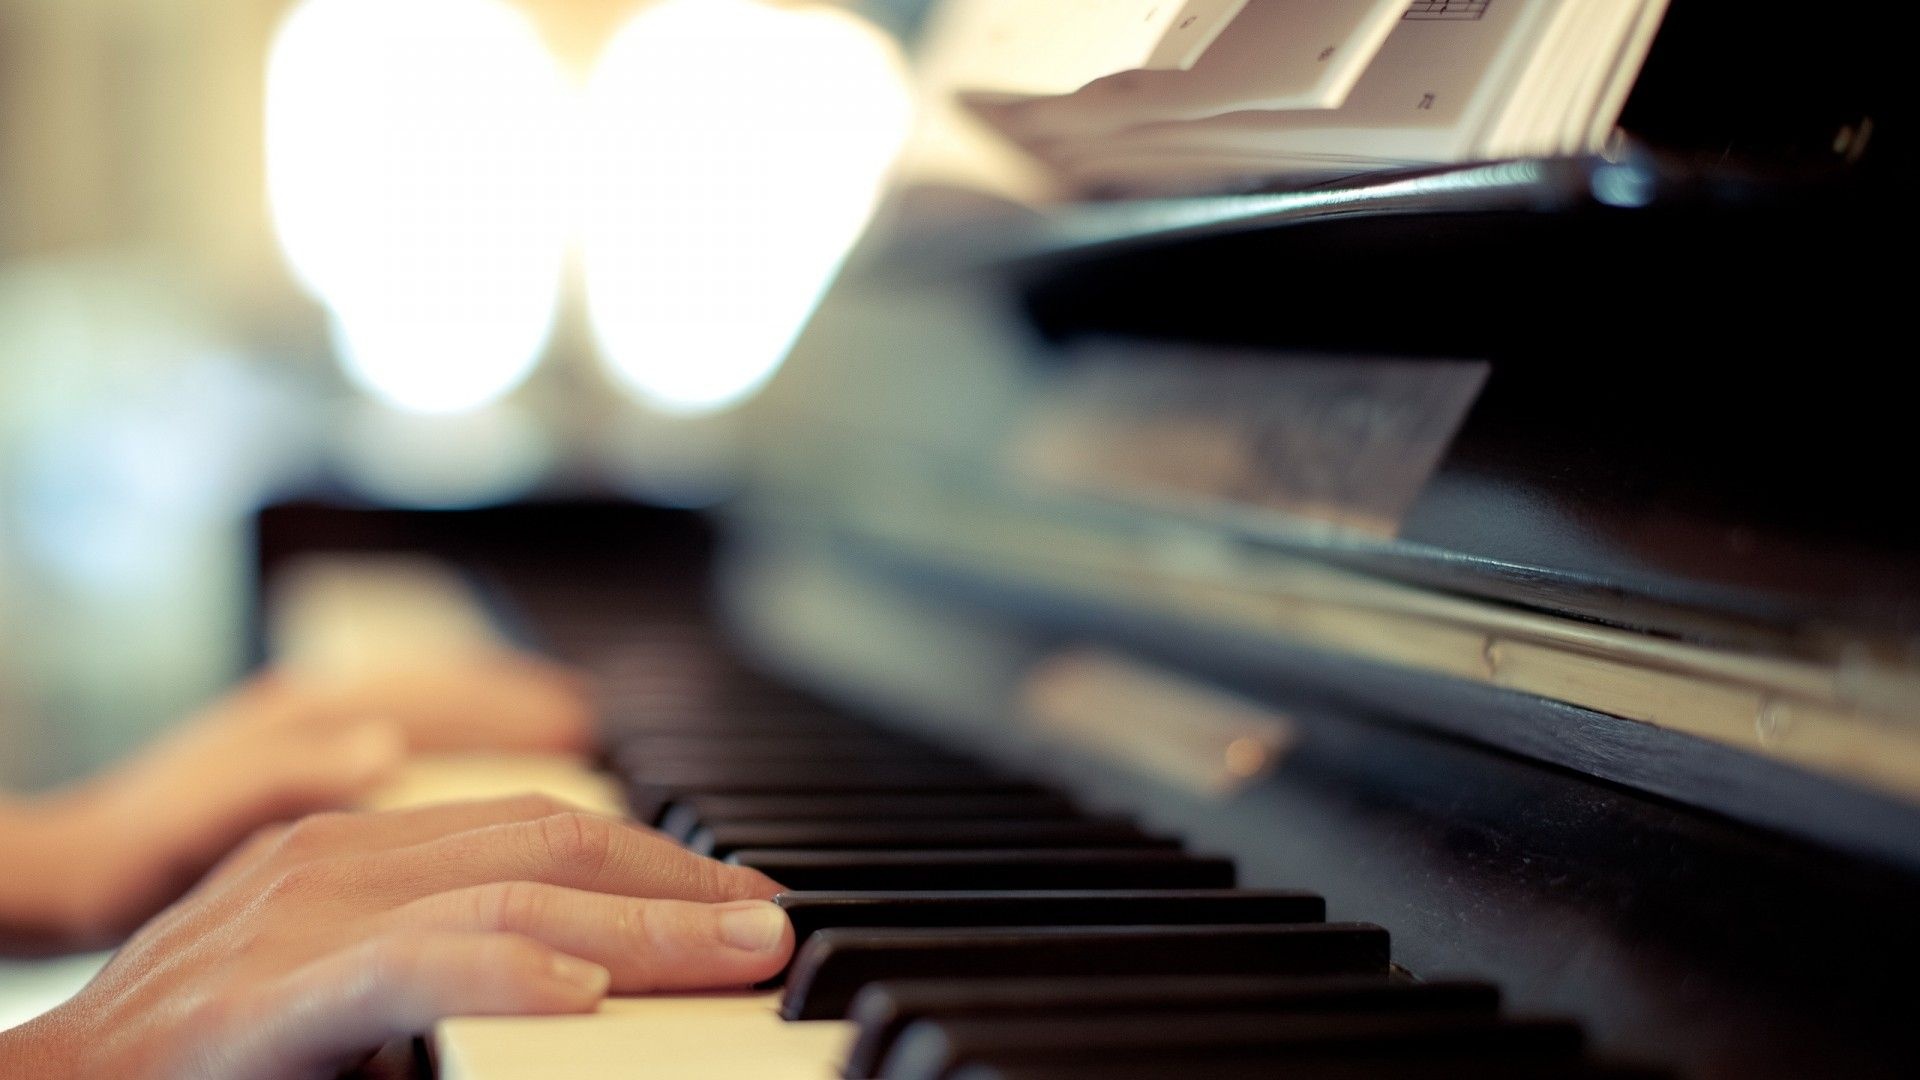 Fortepiano: Playing Piano, Bicolored Keyboard, The Player’s Hands. 1920x1080 Full HD Wallpaper.